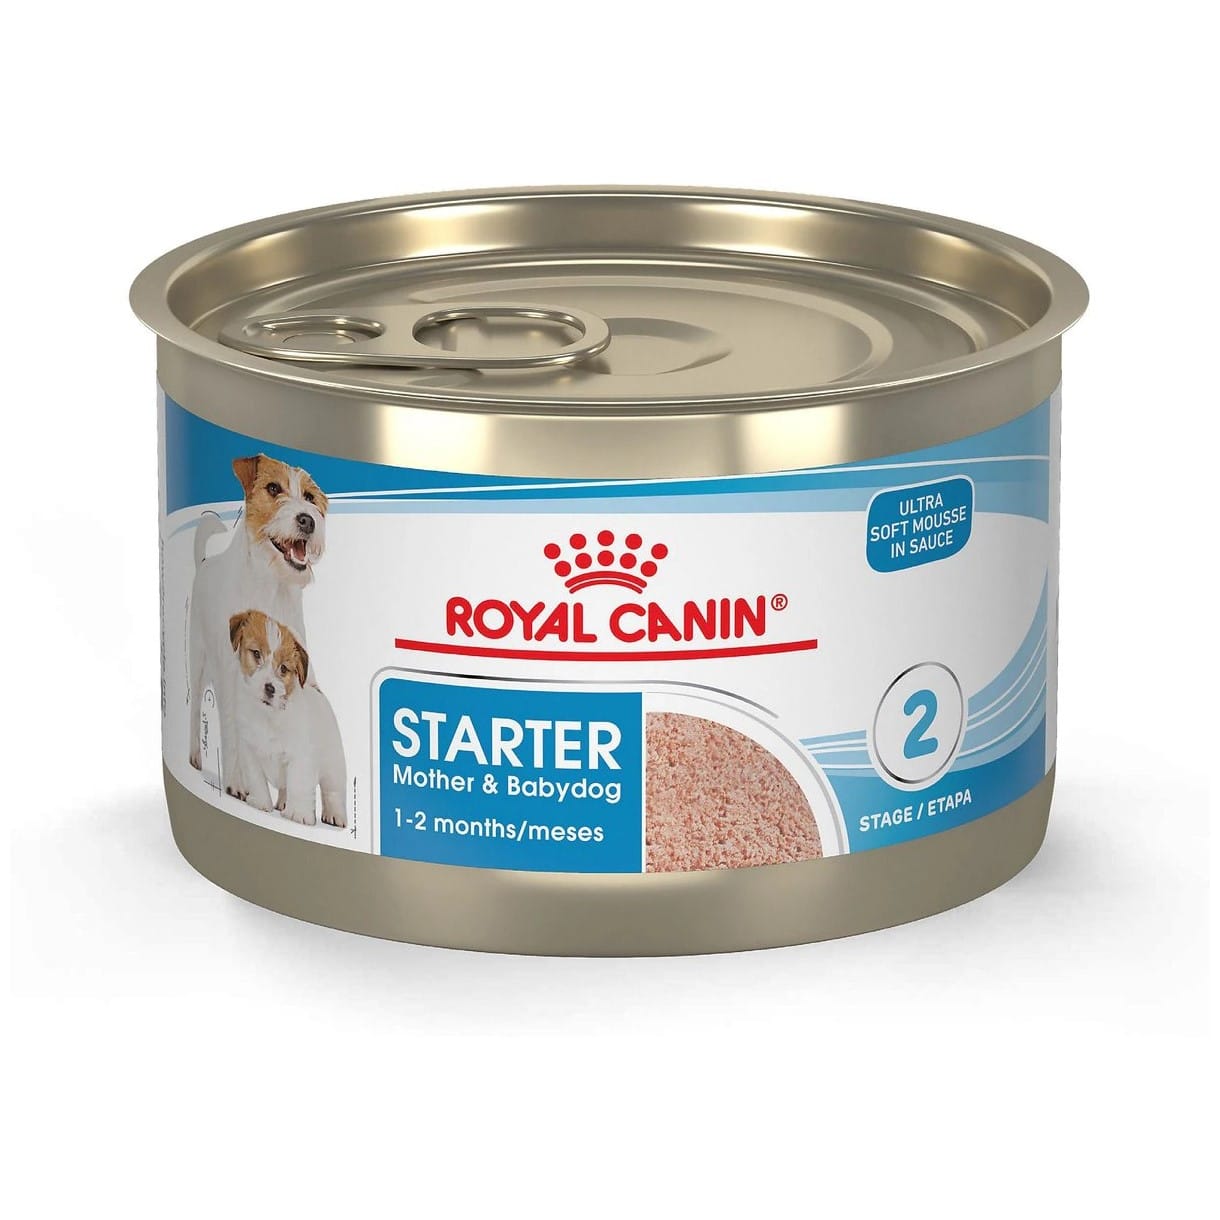 Royal Canin Size Health Nutrition Starter Mother & Babydog Mousse In Sauce Canned Dog Food